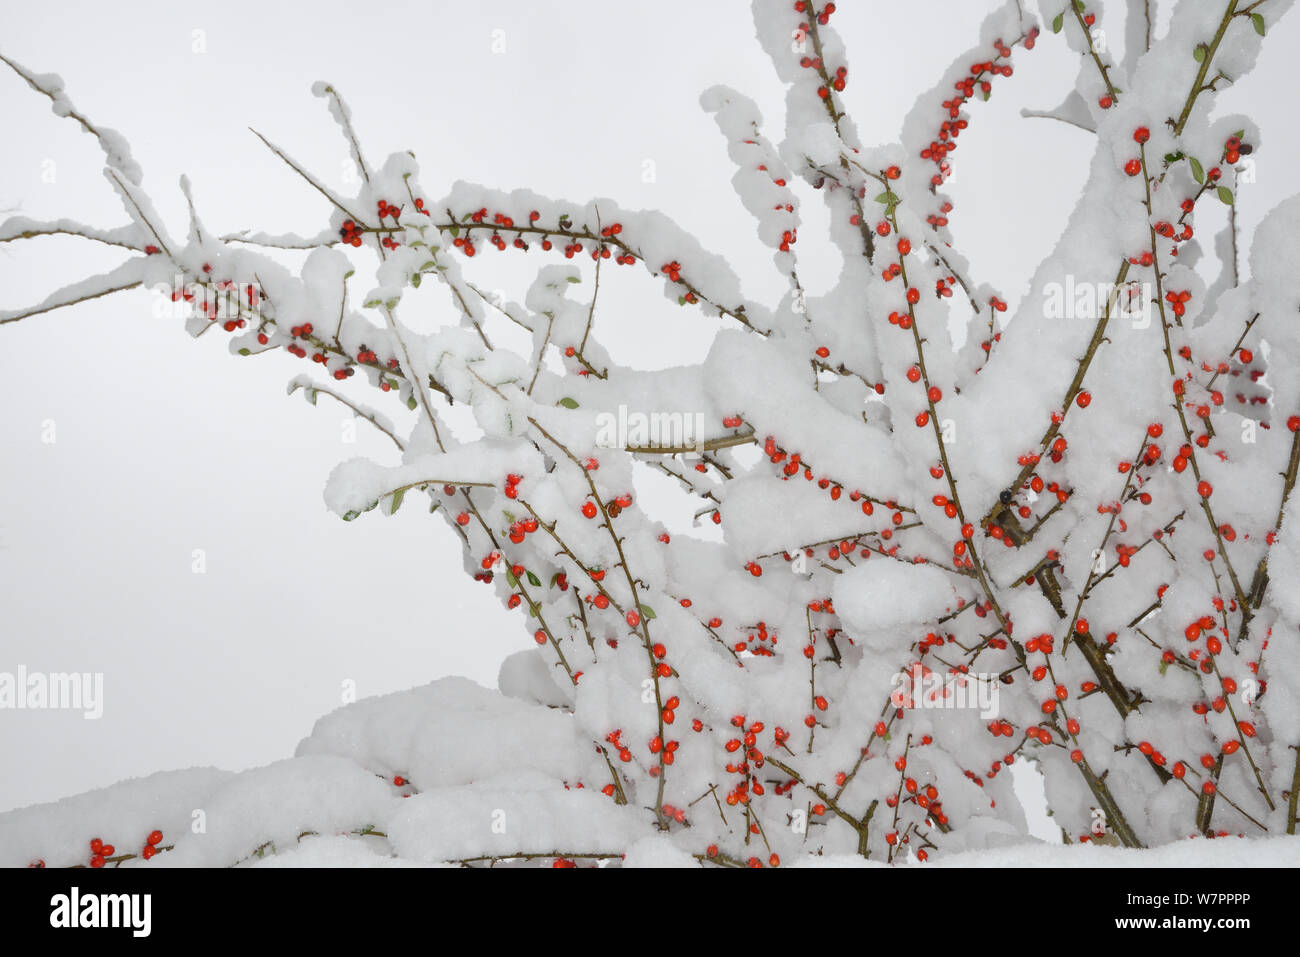 Red Cotoneaster (Cotoneaster) berries covered in thick snow in garden, Wiltshire, UK, January 2013 Stock Photo